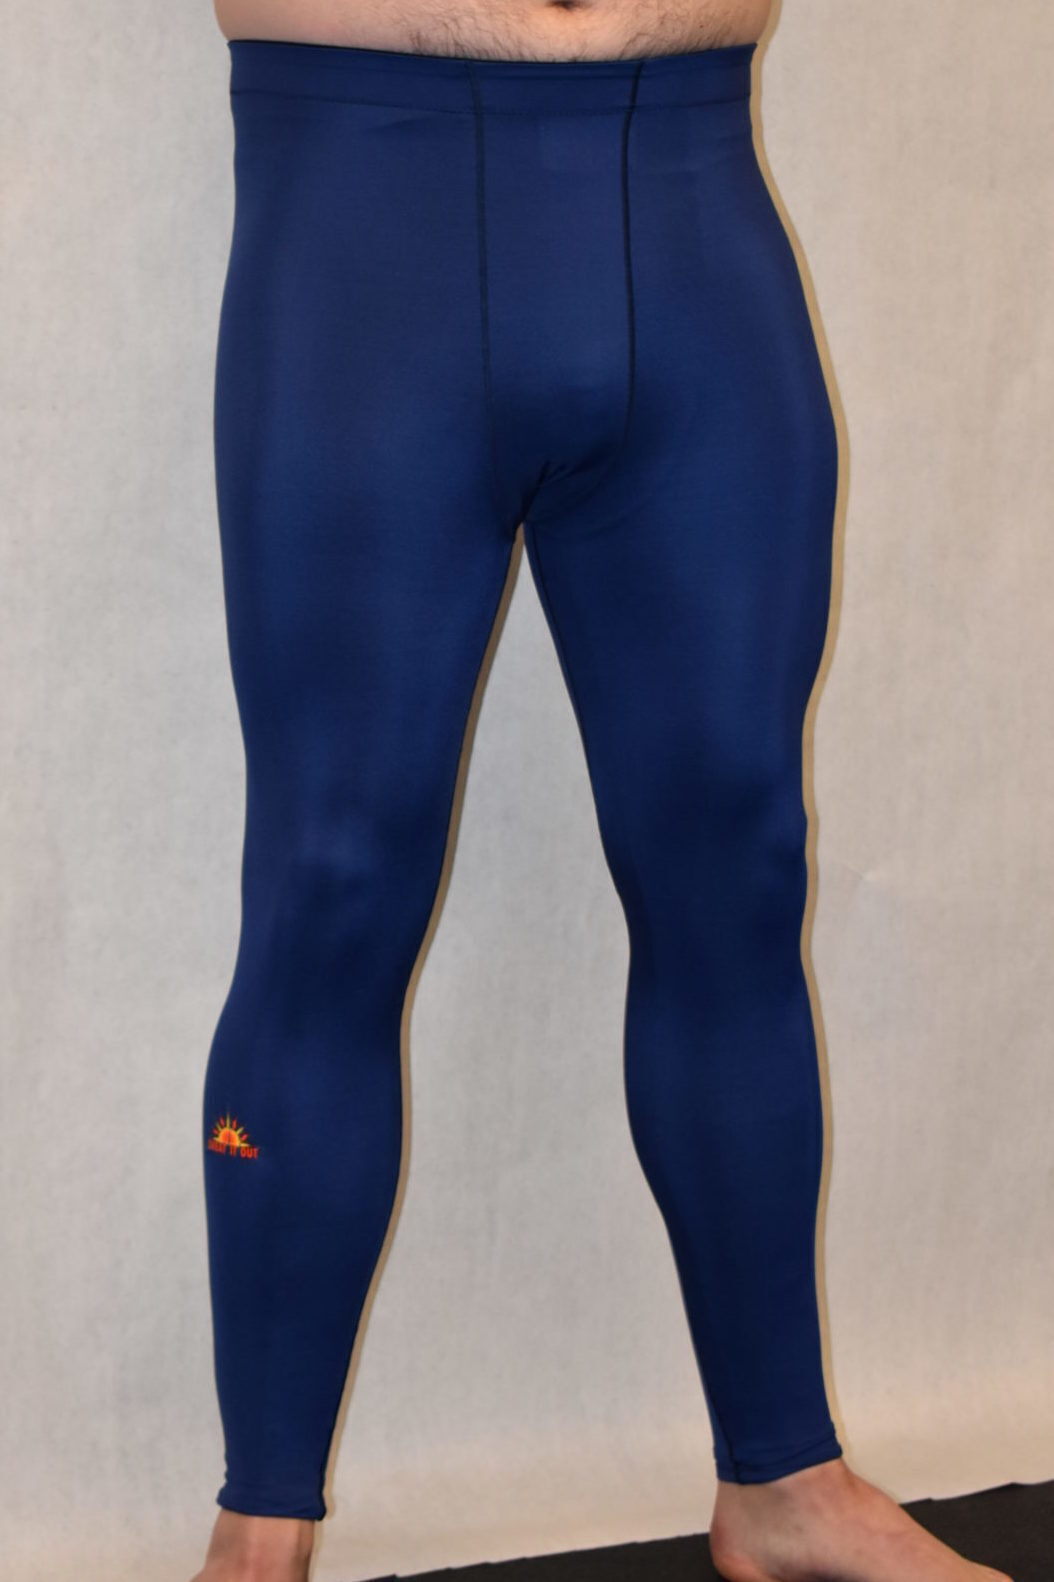 Performance Compression Tights for Men and Women